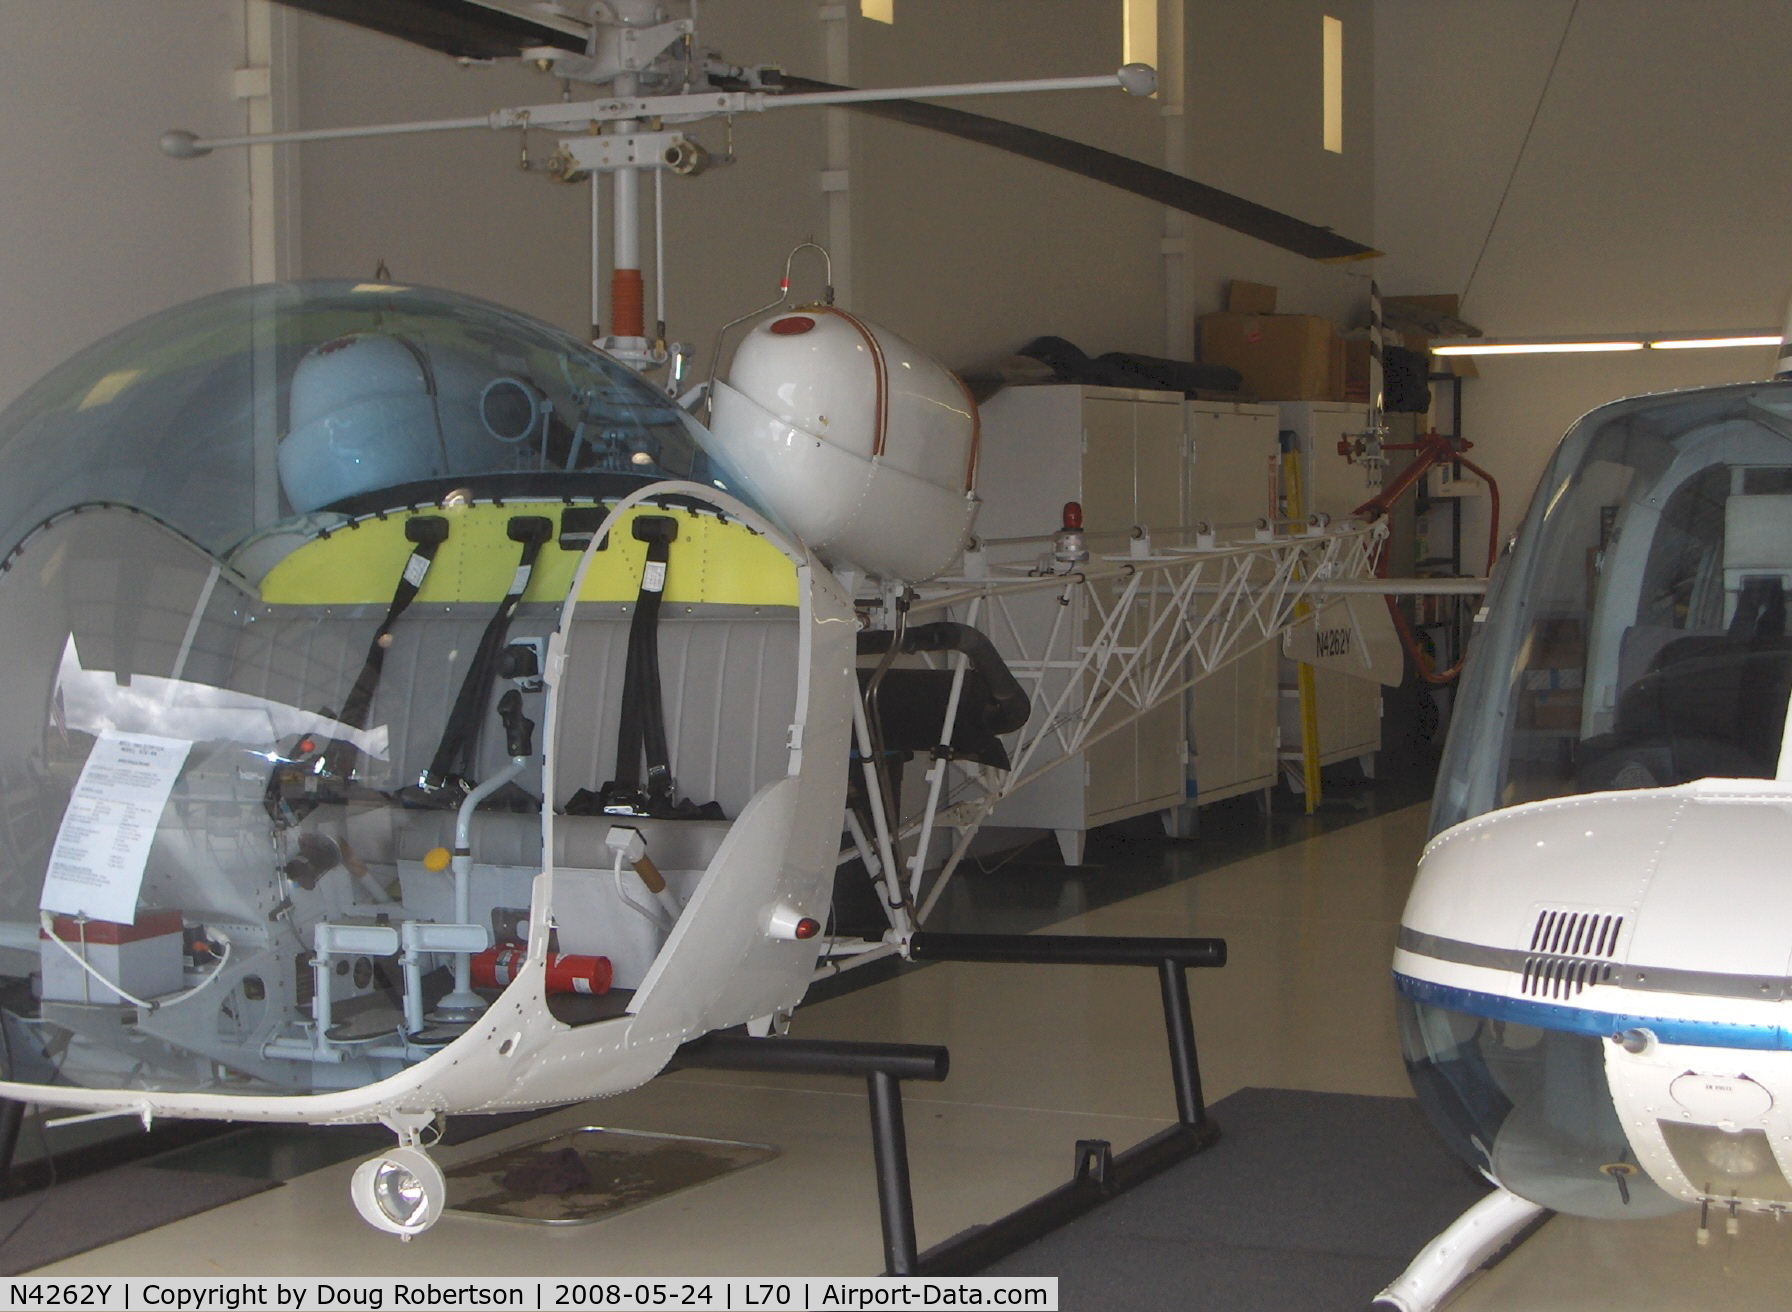 N4262Y, 1965 Bell 47G-4A C/N 7674, 1965 Bell 47G-4A, Lycoming VO-540 305 Hp. The Bell 47 was the world's first practical mass-produced helicopter offering reliabilty in a simple airframe.